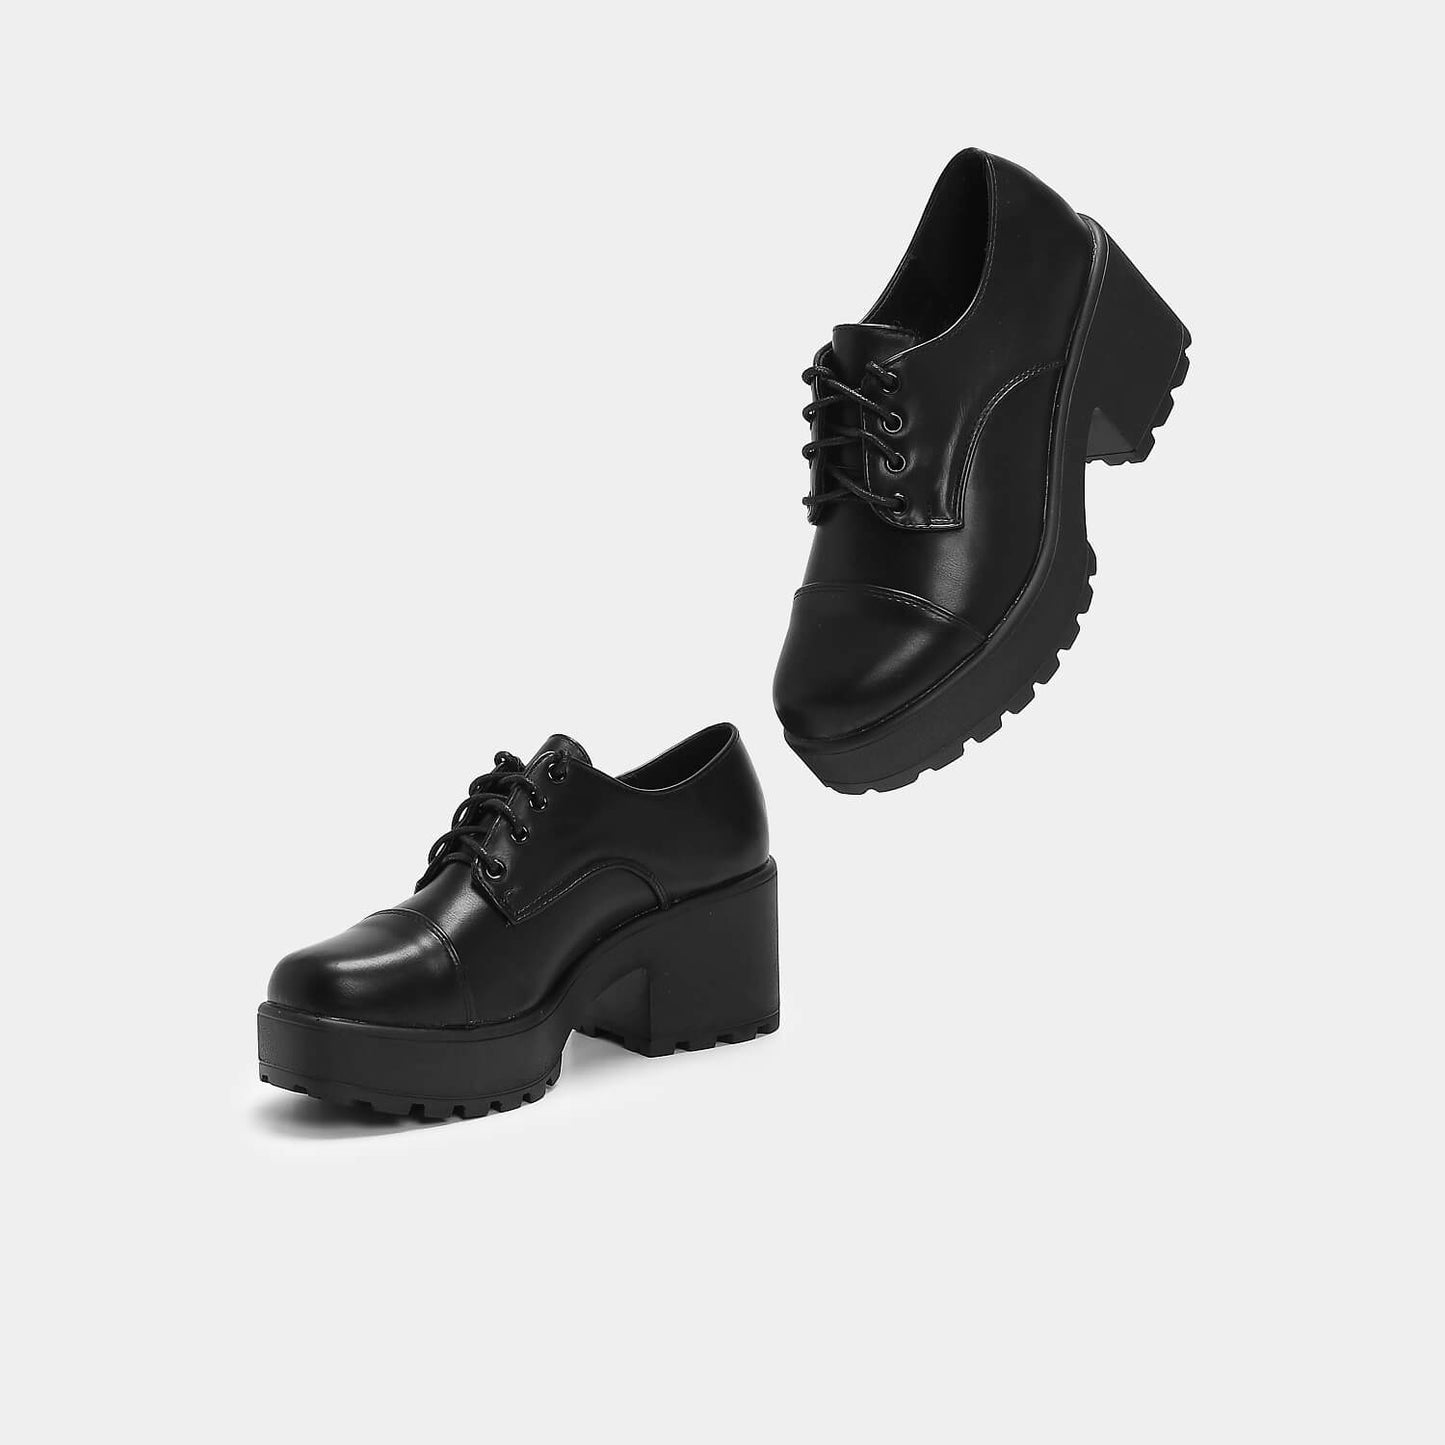 Rei Chunky Lace Up Shoes - Shoes - KOI Footwear - Black - Side View